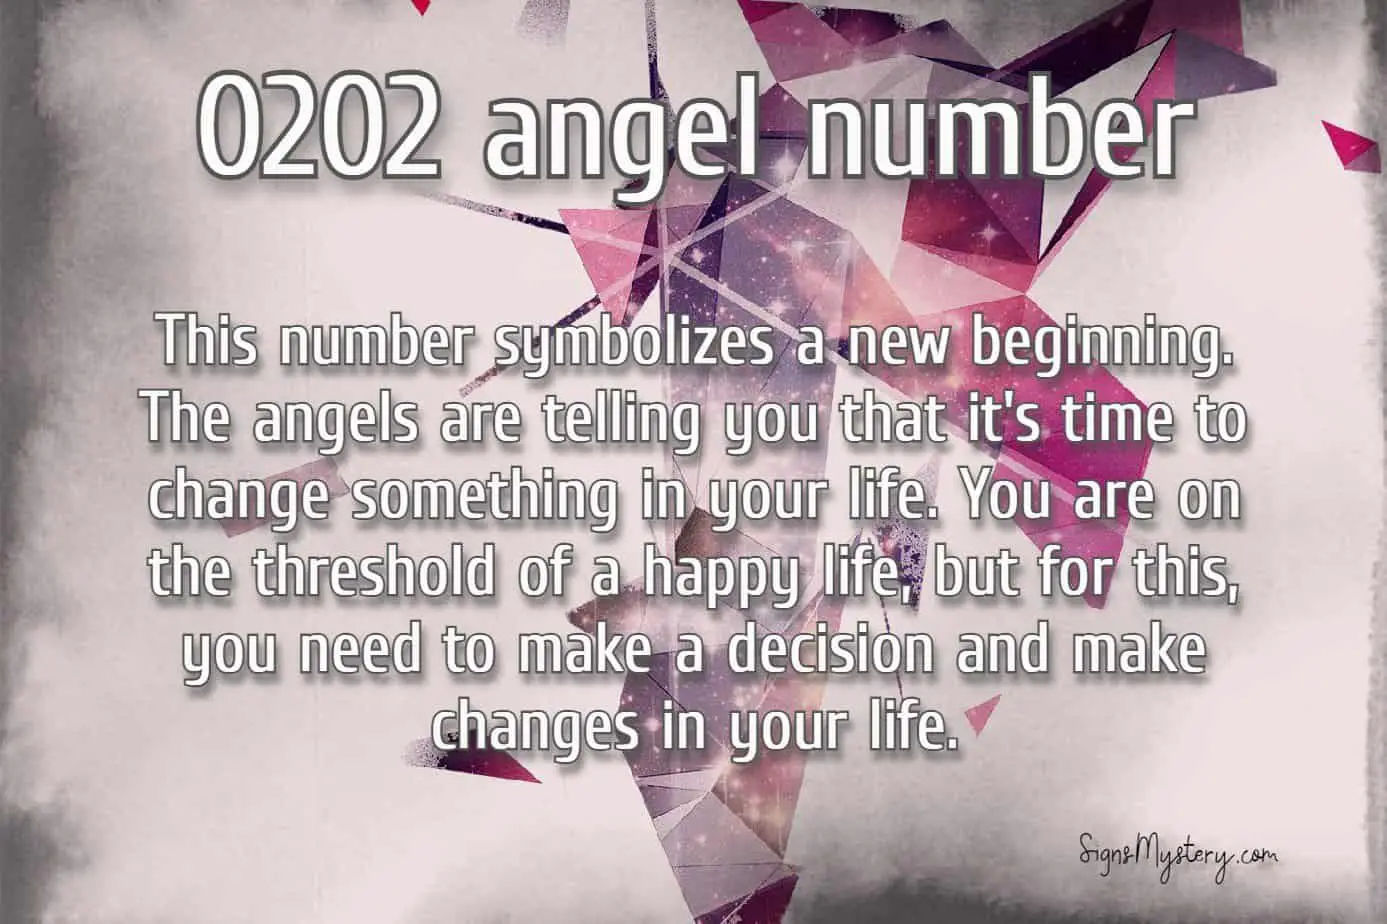 0202 angel number meaning